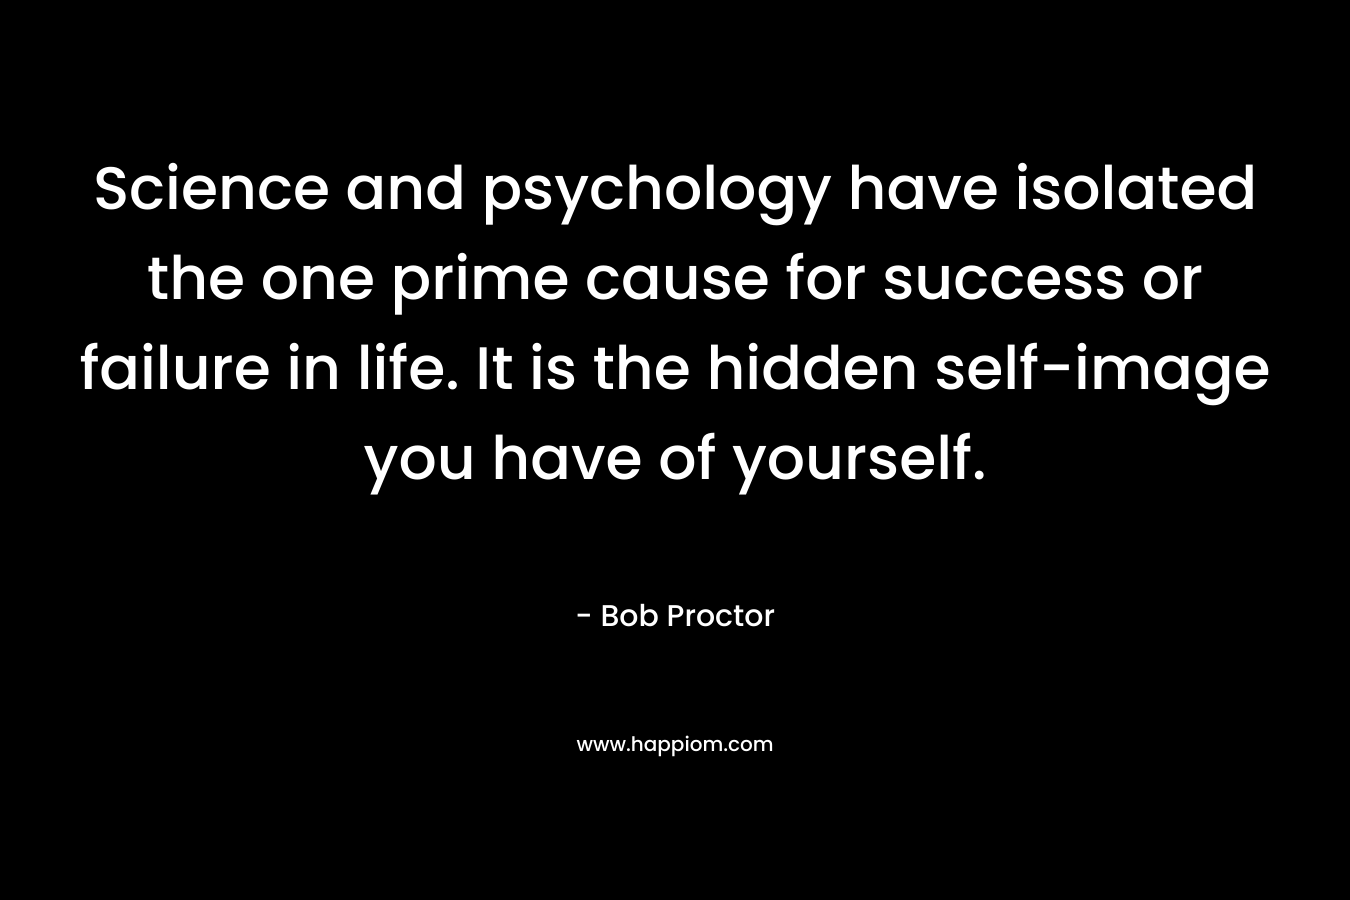 Science and psychology have isolated the one prime cause for success or failure in life. It is the hidden self-image you have of yourself.